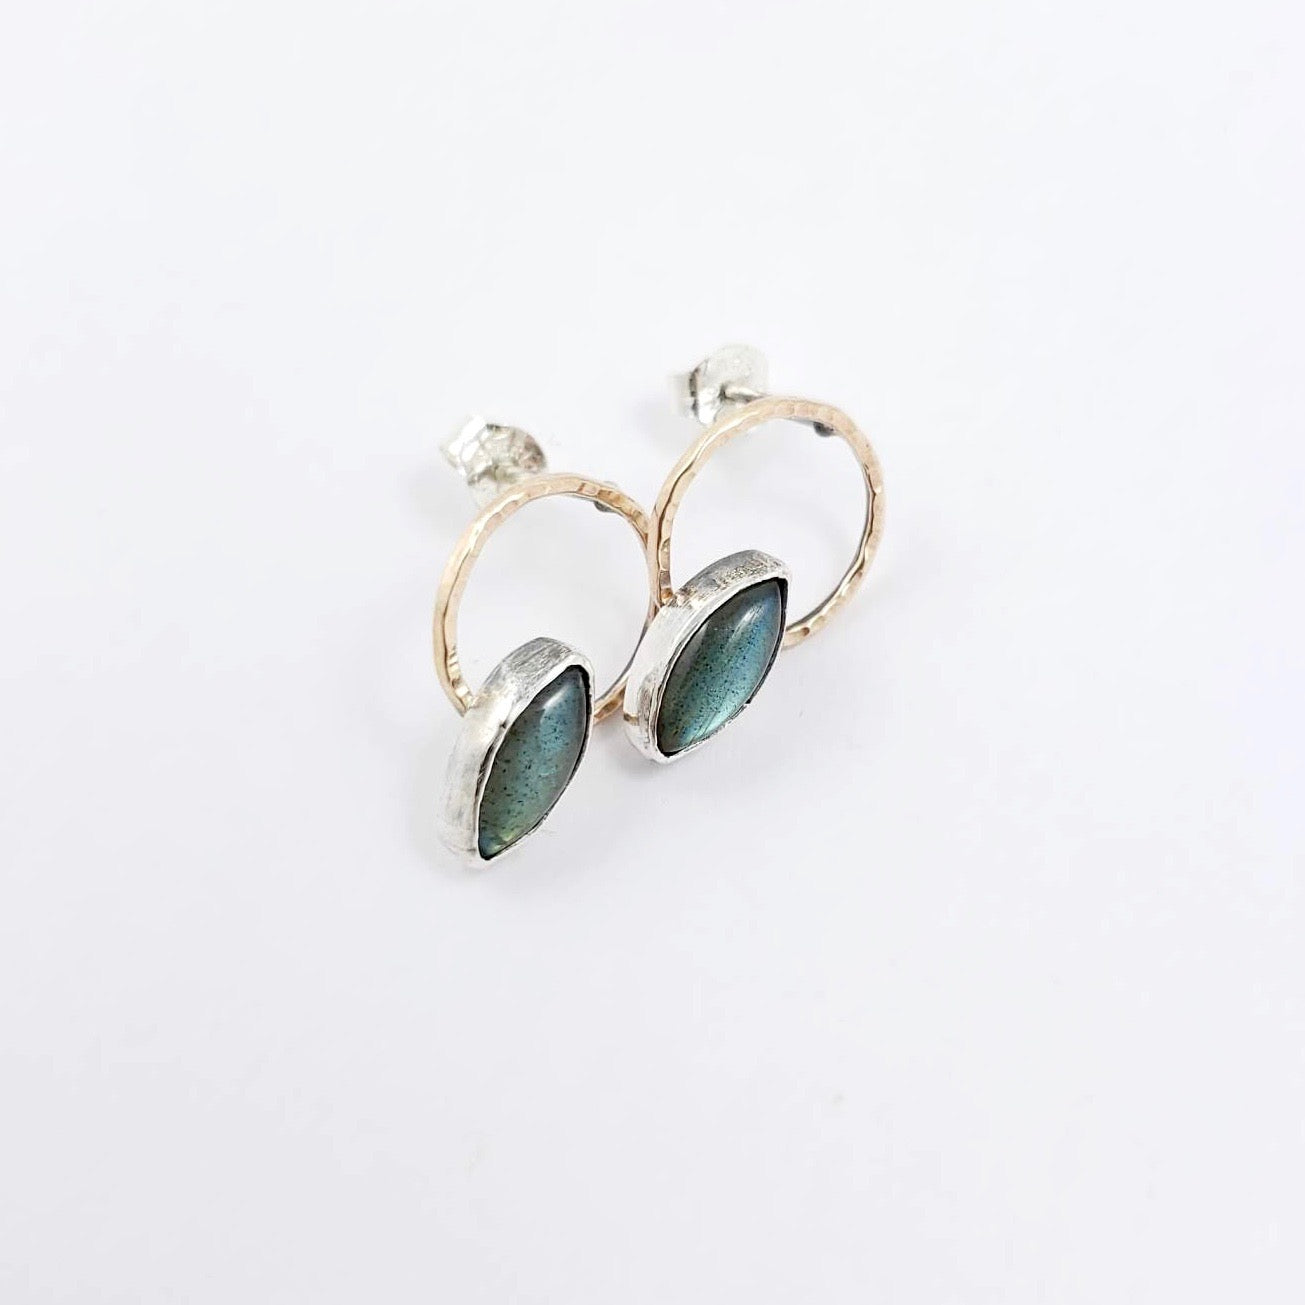 IRIS - "The Seer" Labradorite and Gold-filled Studs